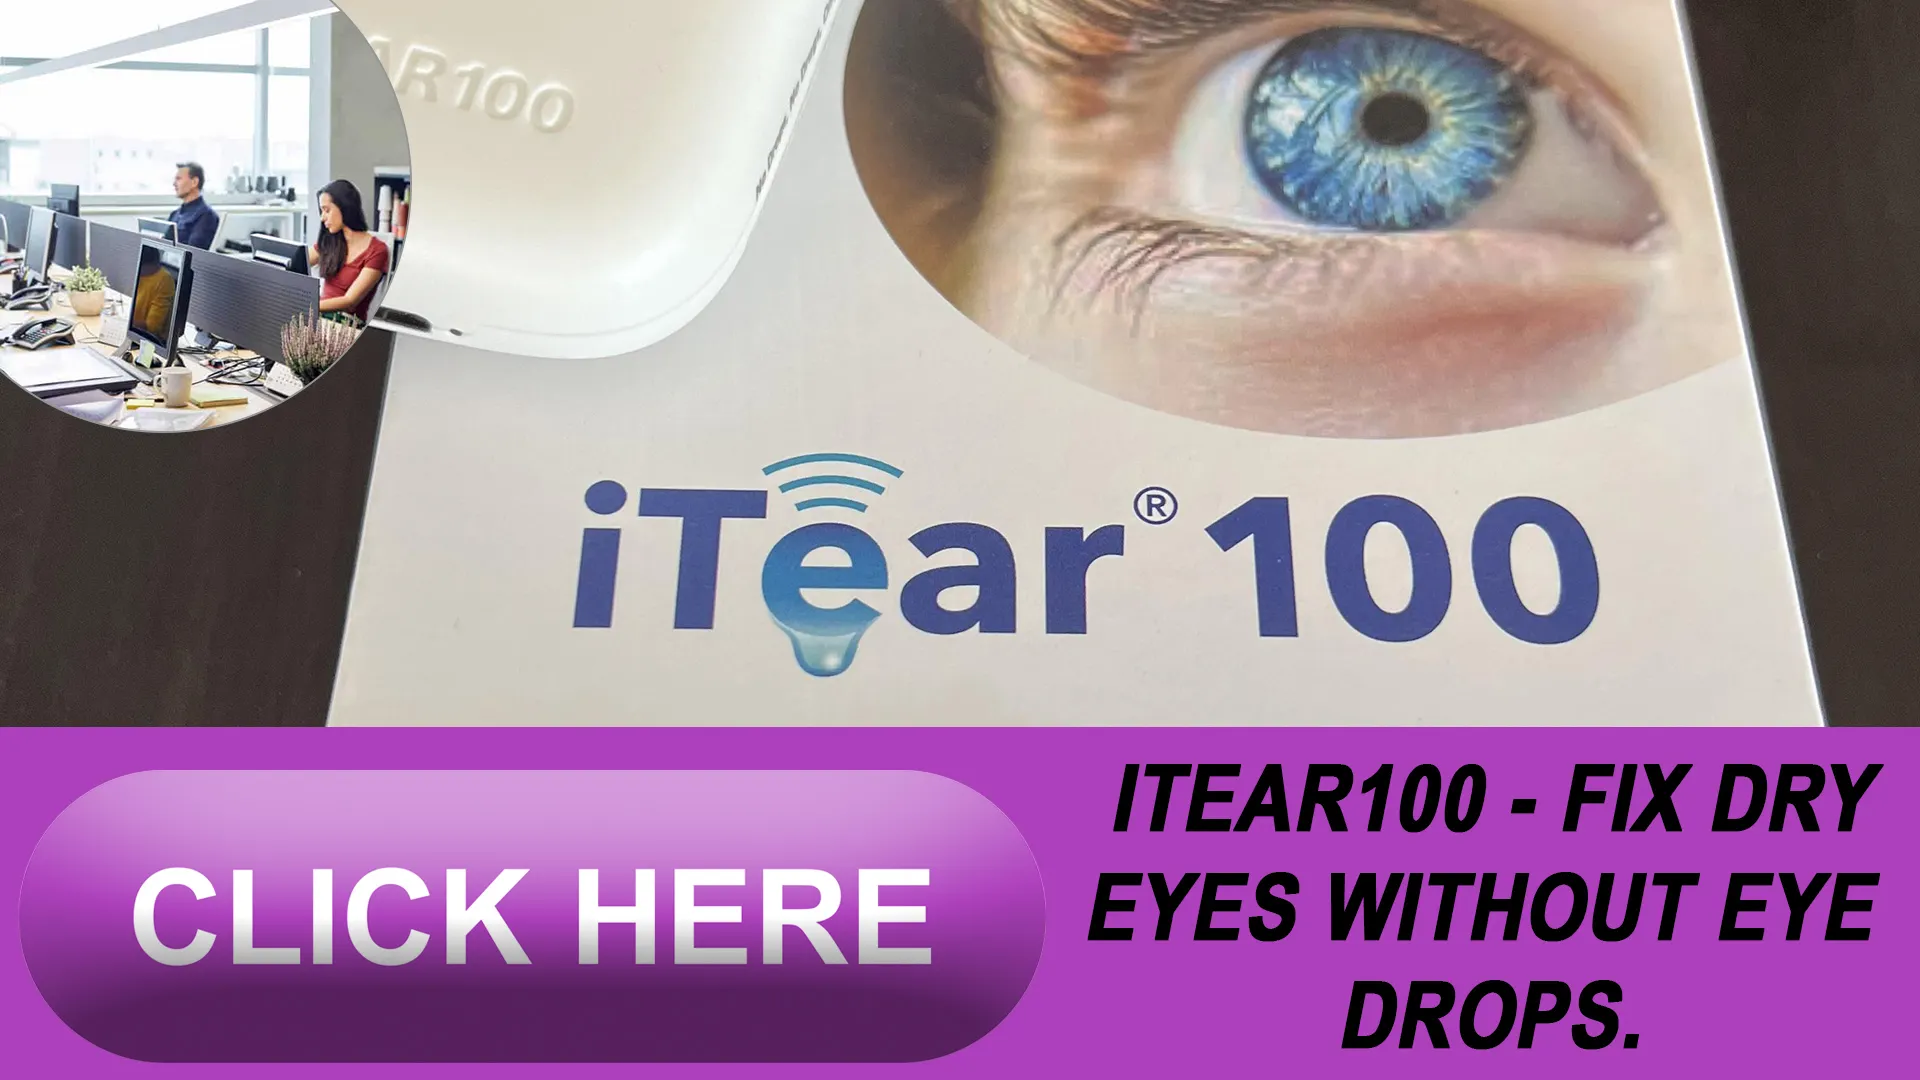 Introducing the iTEAR100: Your Personal Oasis for Dry Eyes